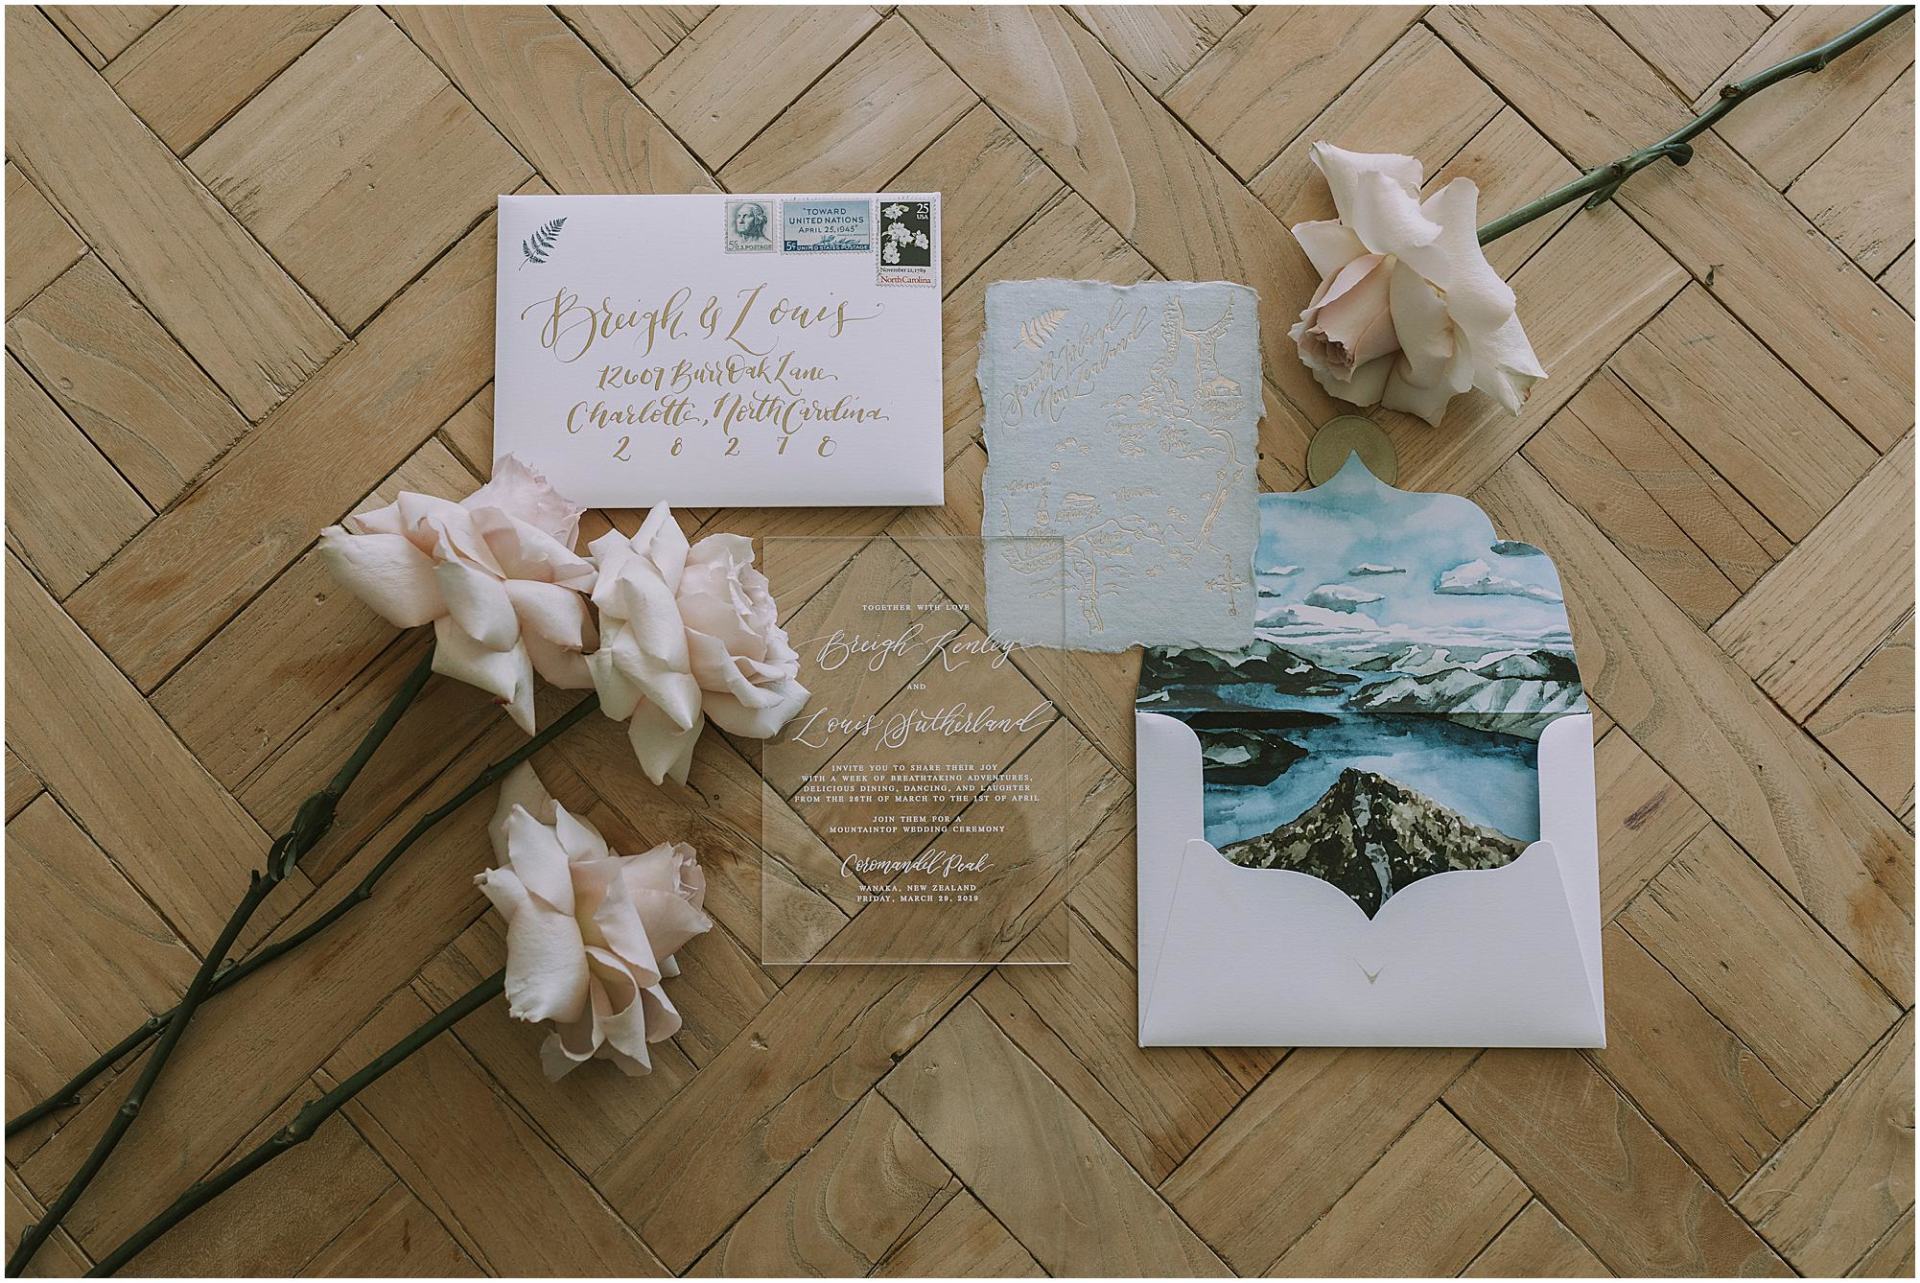 Charlotte Kiri Photography - Wedding Photography of pink roses scattered across stylish wedding invitations with fern emblems, and gold and white calligraphy, accompanied by lovely envelopes with Wanaka scenery of mountains and lakes printed inside them, in Wanaka, New Zealand.